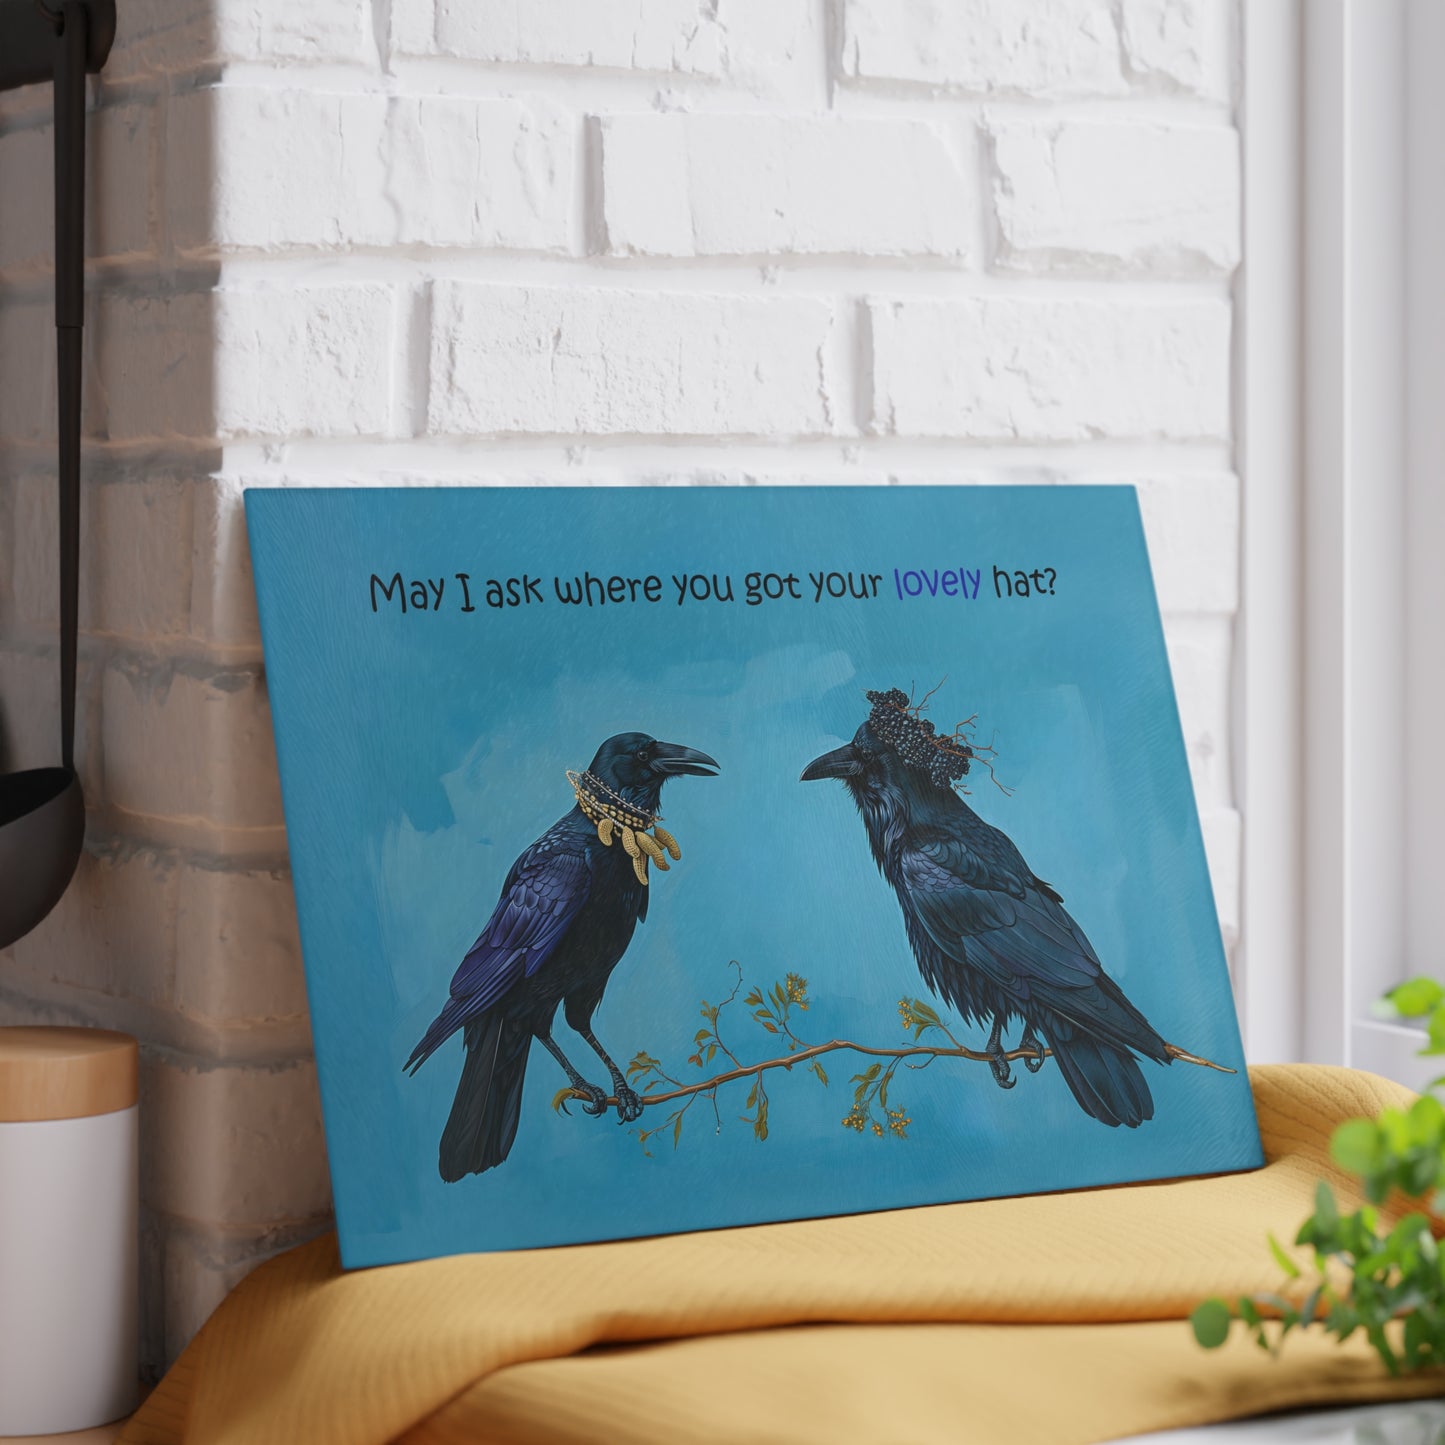 Crow and Raven Peanut Necklace and Blackberry Hat, Funny Bird Glass Cutting Board - 2 Sizes